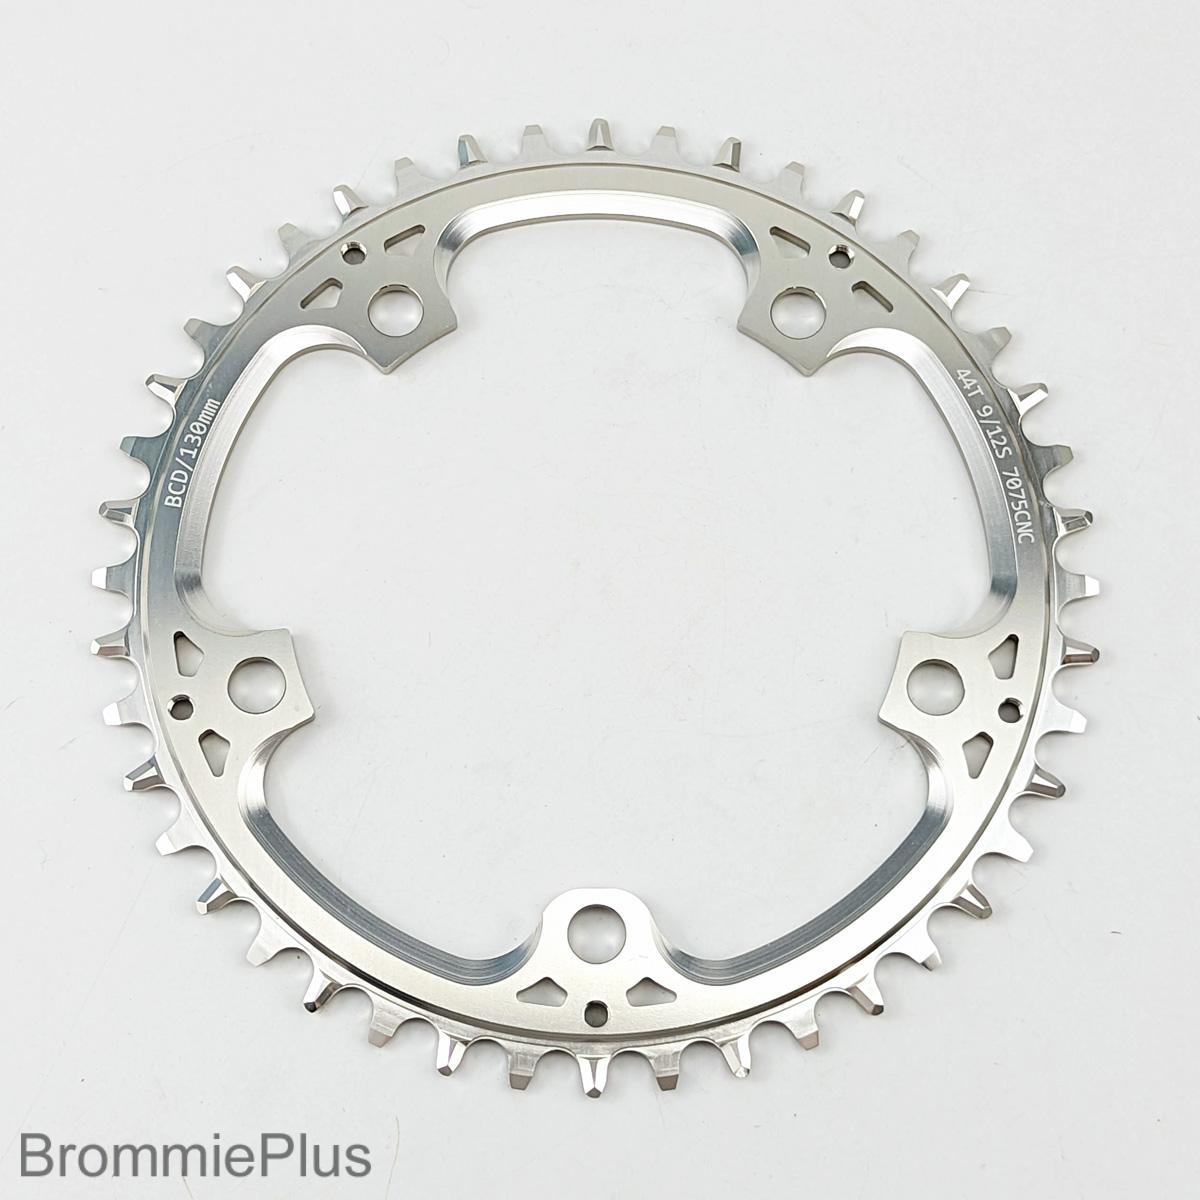 High Quality 44T 7075 T6 Narrow-Wide Chainring